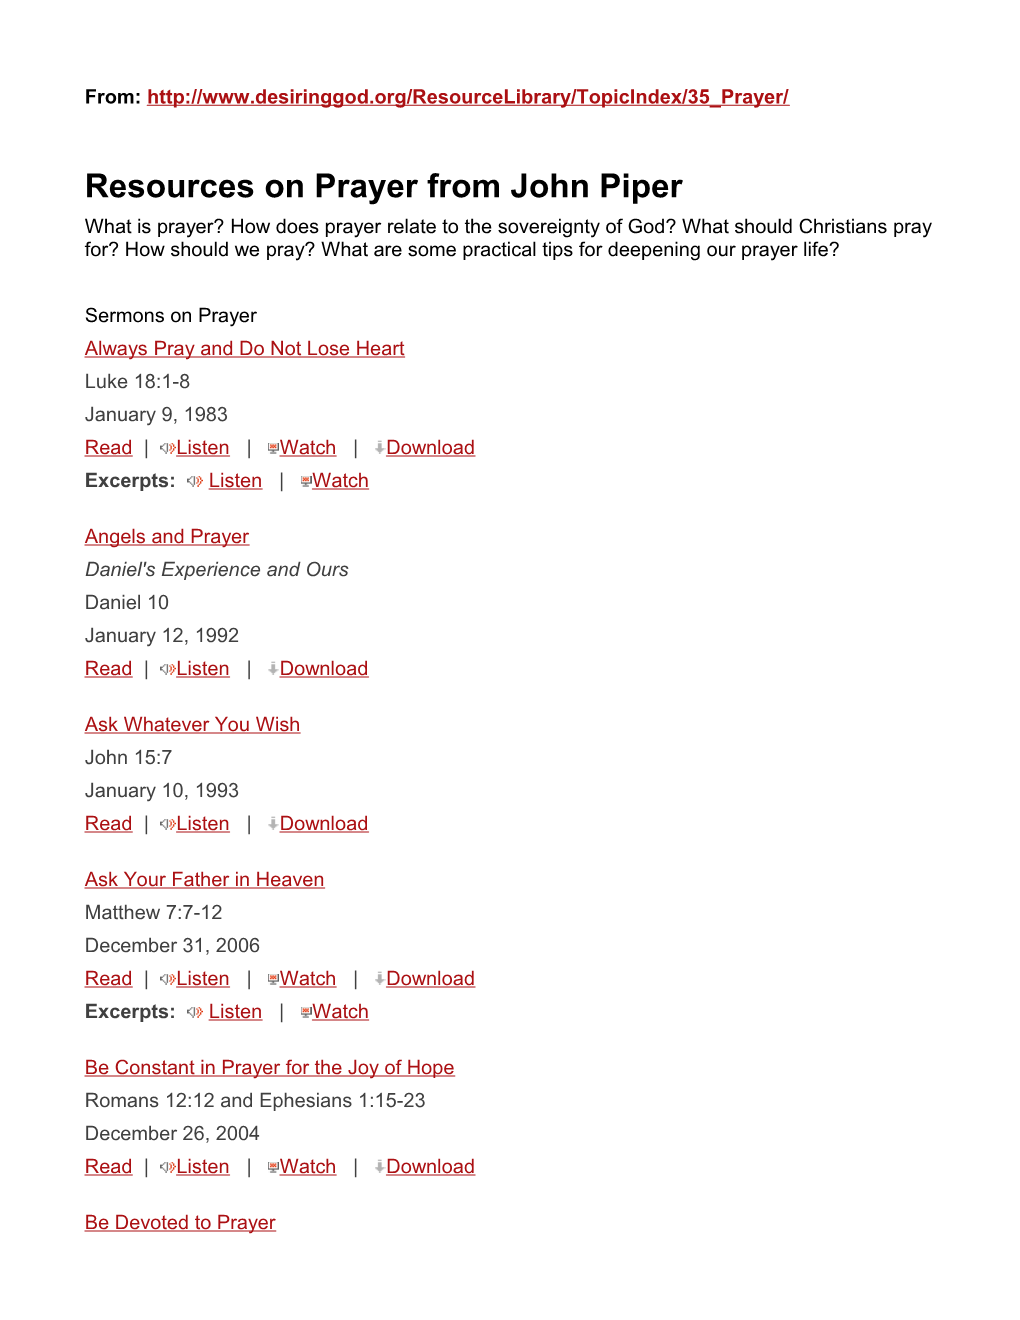 Resources on Prayer from John Piper